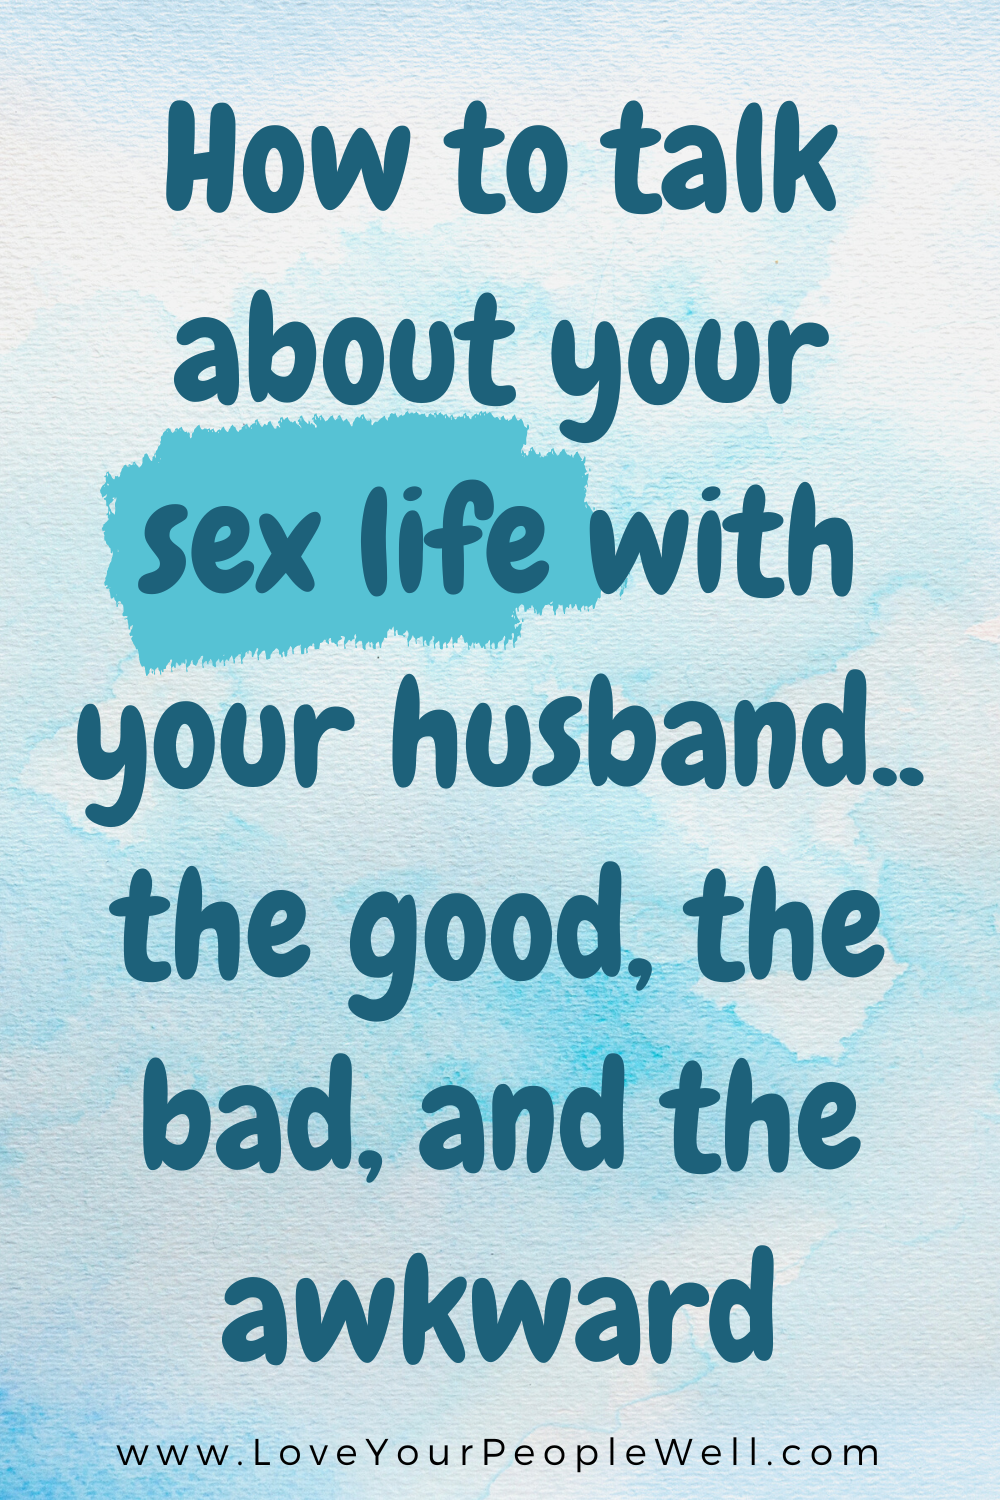 improve your married sex life